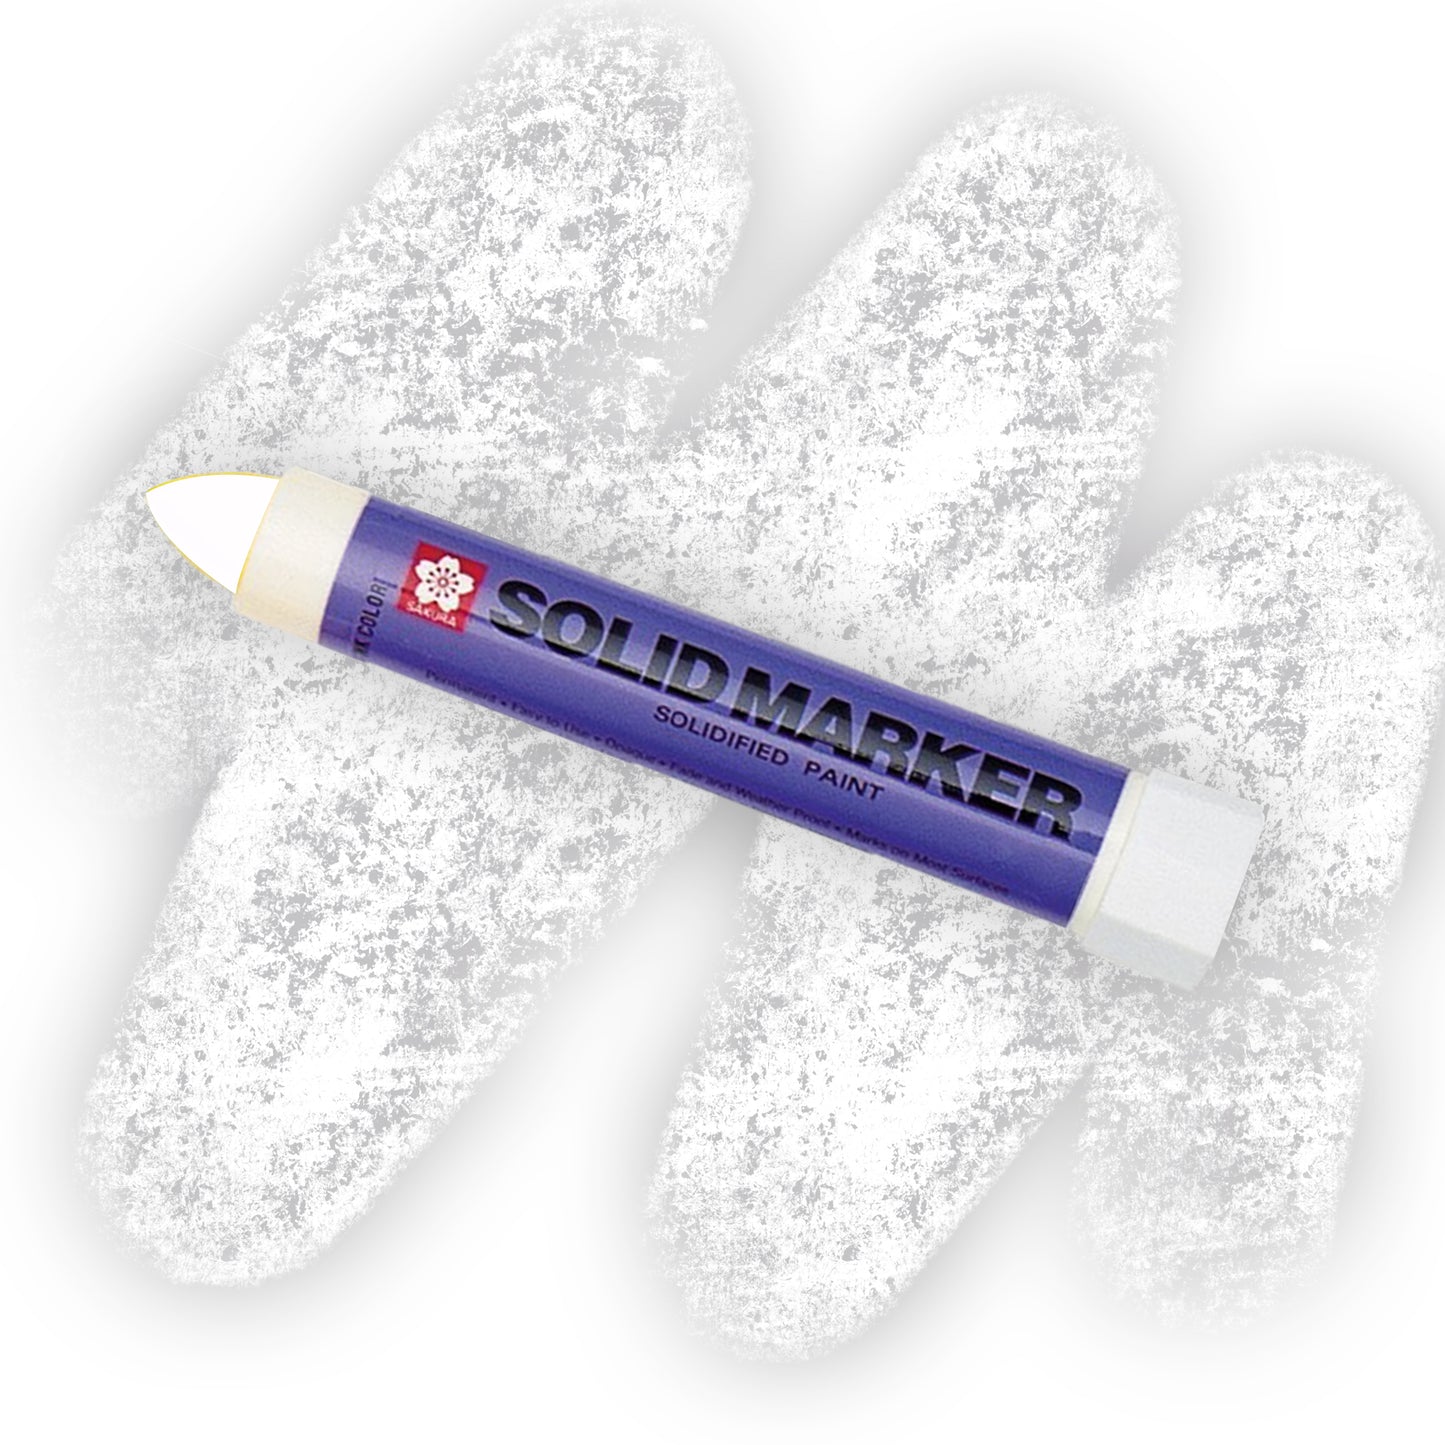 A white marker with a purple label that reads "SOLID MARKER" and a white crayon swatch.